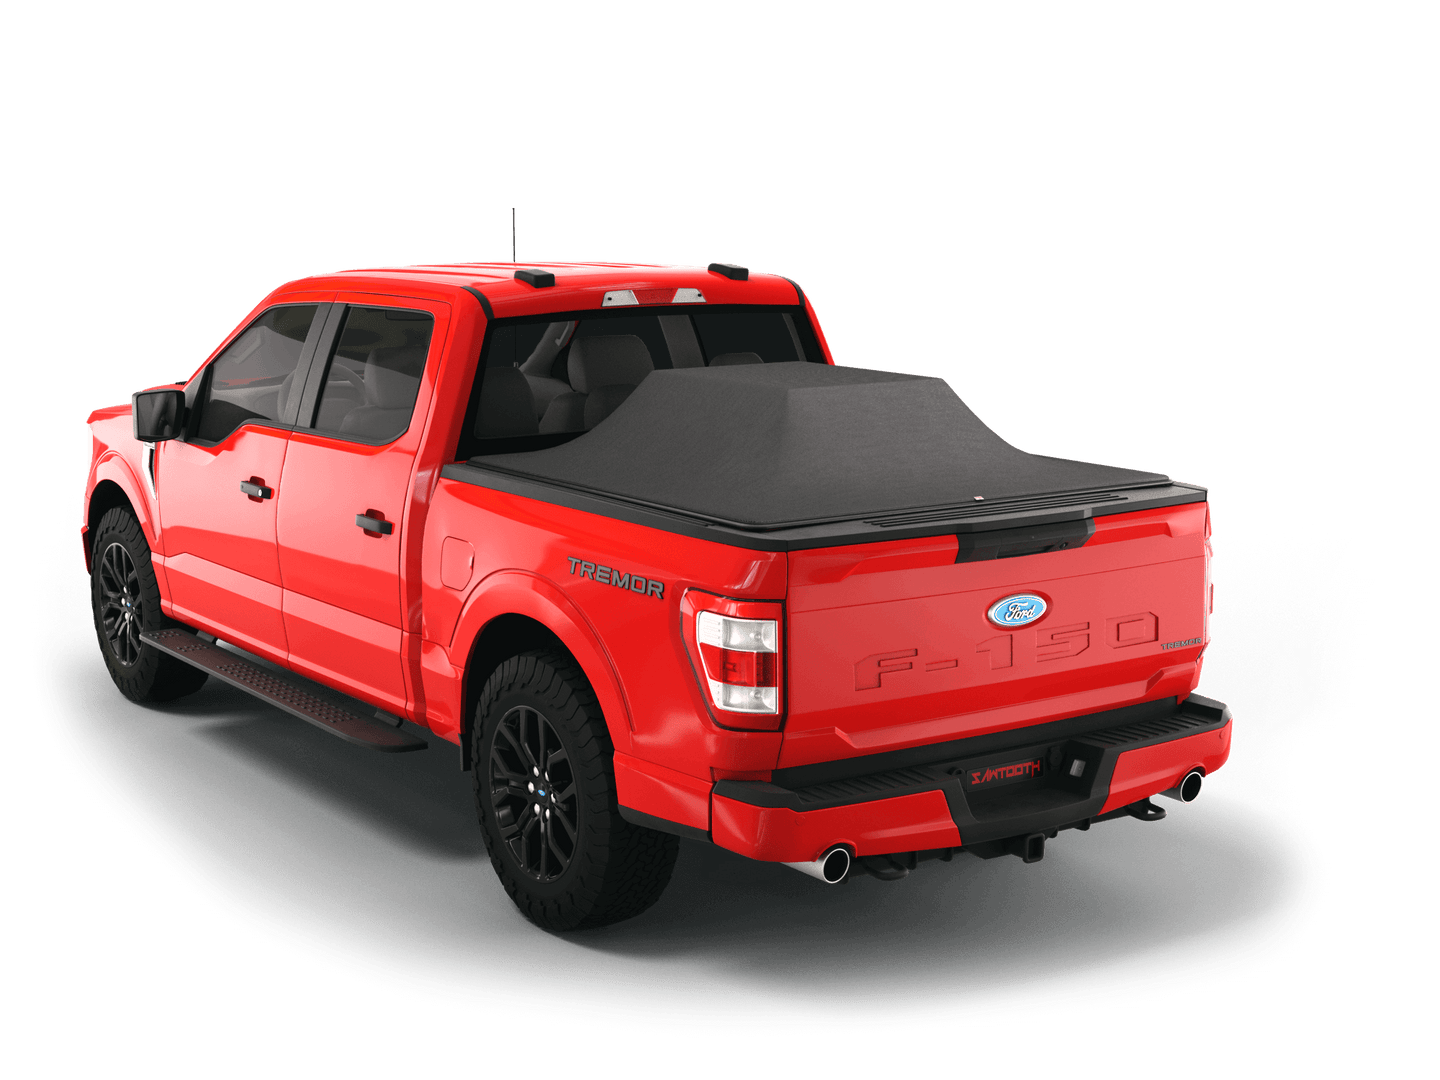 Red Ford F-150 with gear in the truck bed and the Sawtooth Stretch tonneau cover expanded over cargo load